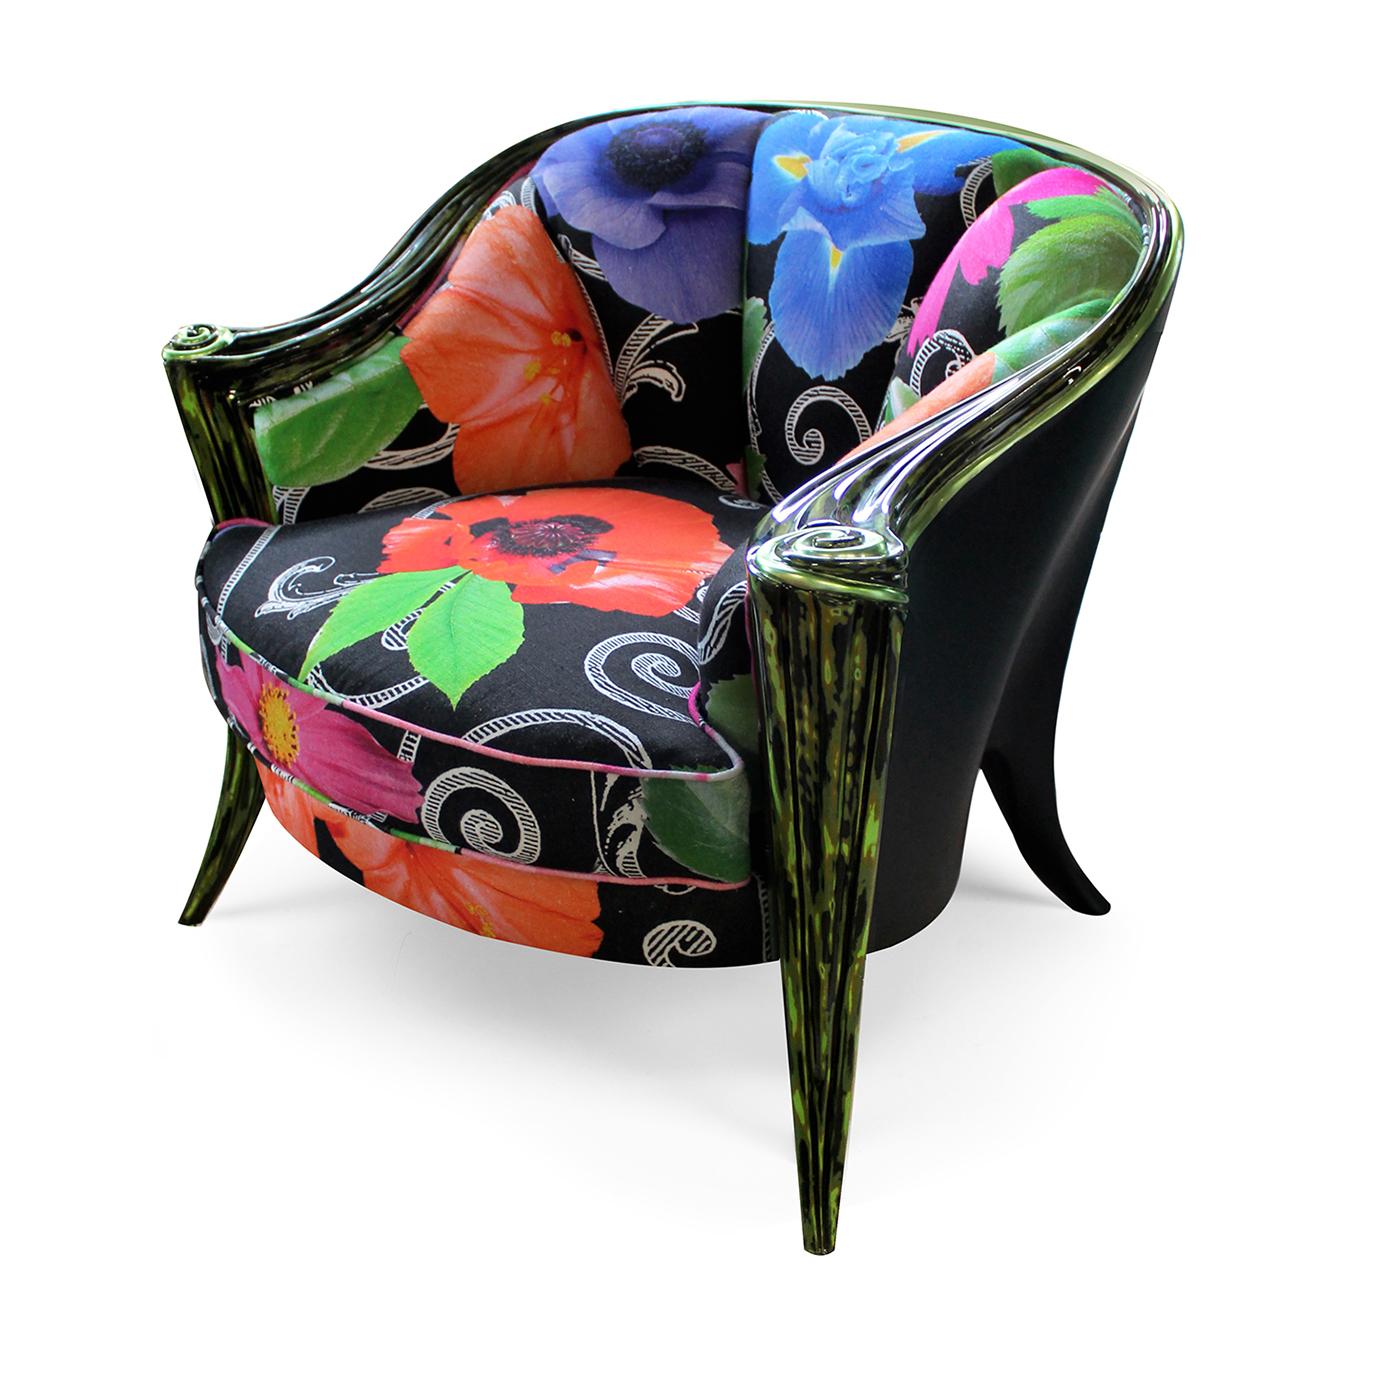 Introducing the opulent Opus Futura Black Flower armchair, a creation of Carlo Rampazzi. This piece features a meticulously carved wooden structure that captivates with its contrasting finishes - a sleek black lacquer finish on the backrest, an